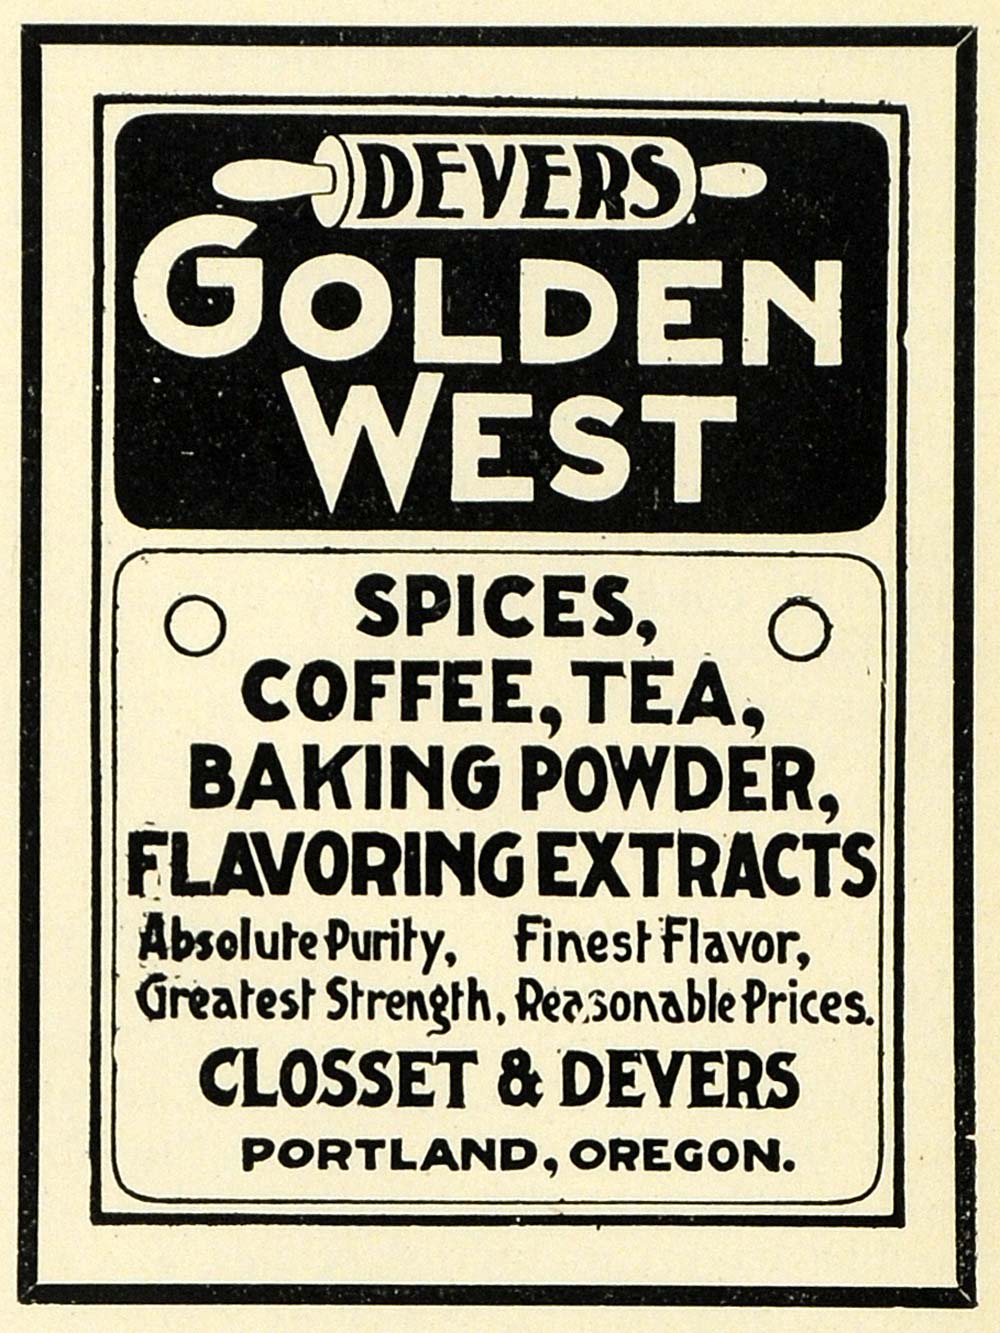 1903 Ad Devers Golden West Glosset Spice Coffee Food - ORIGINAL ADVERTISING PM2